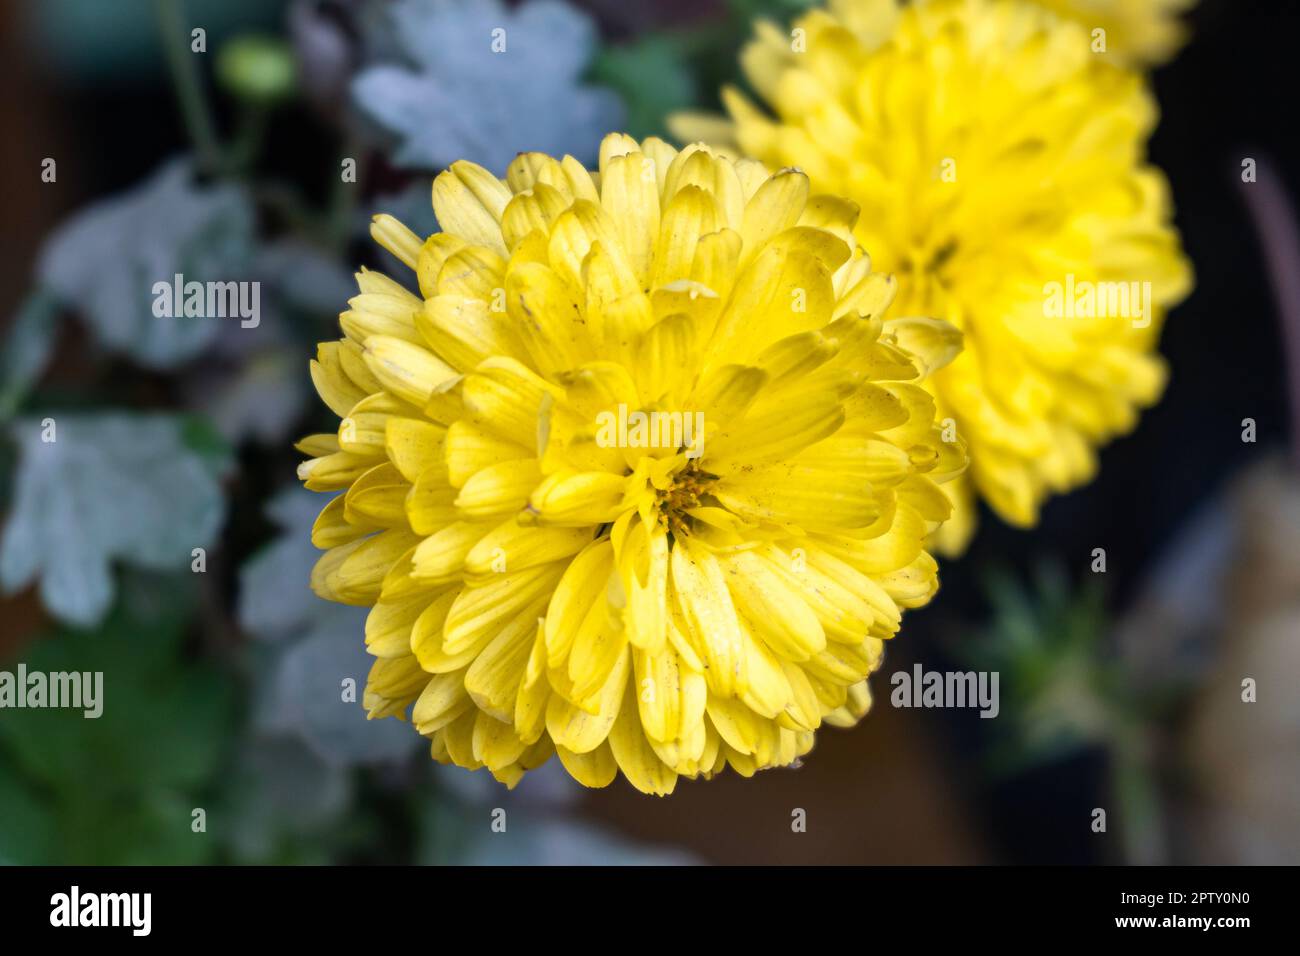 A bouquet of beautiful chrysanthemum flowers isolated on outdoors. Portrait view of Yellow Chrysanthemum flower. Chrysanthemums in the garden. Stock Photo